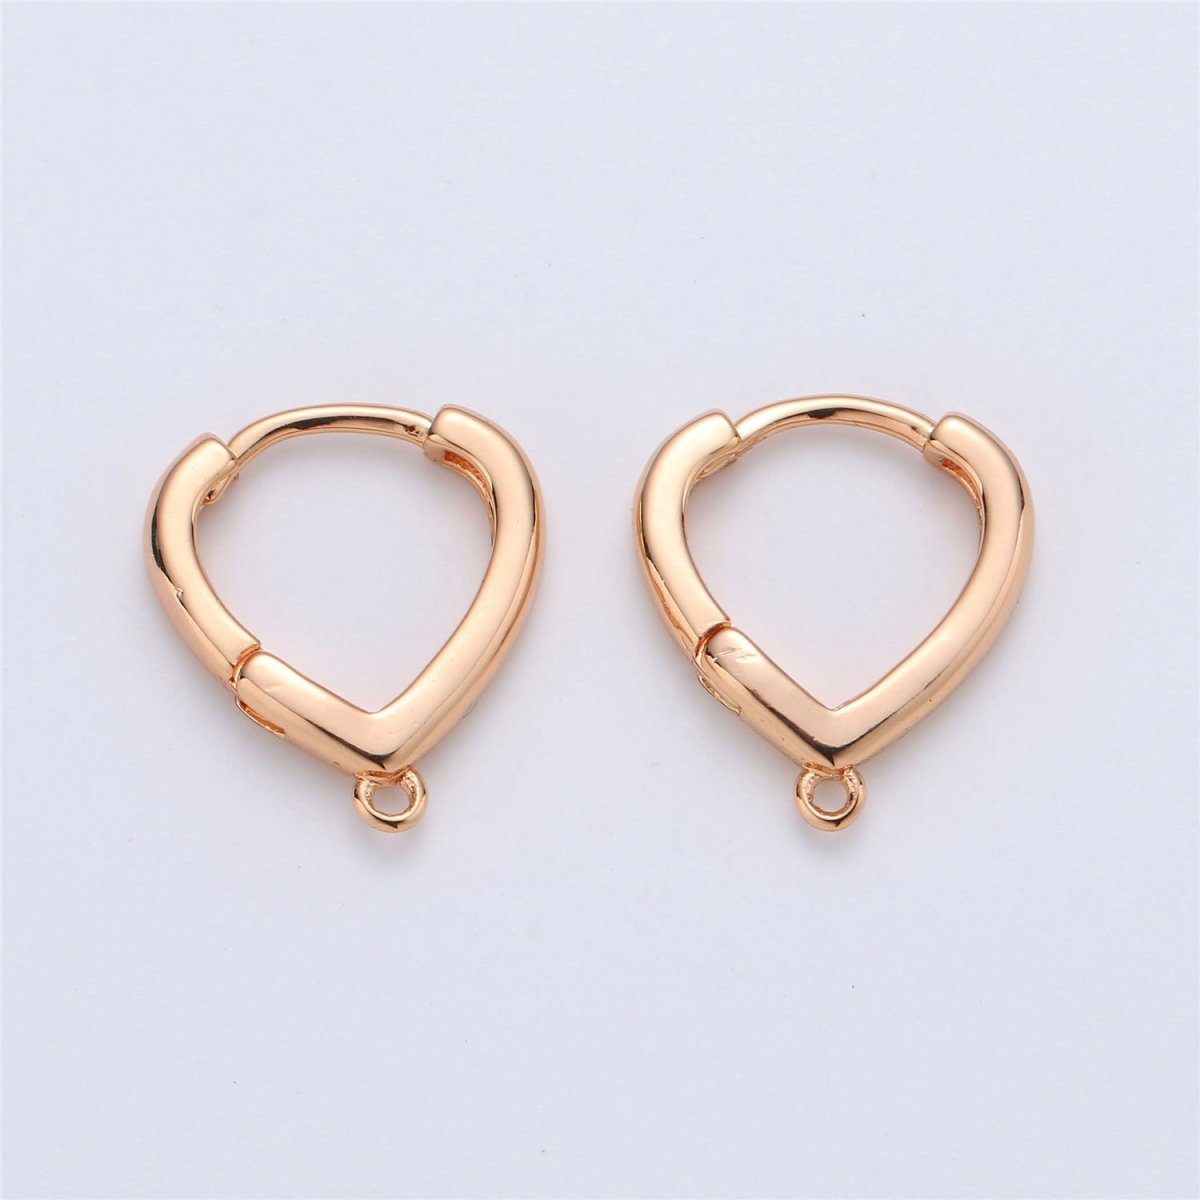 24k Gold Filled Oval Easy Snap Earring with Jump Ring, Earring Supplies for DIY Earring Jewelry, Snap Click On Earring, Oval Shape K-467 K-867 - DLUXCA